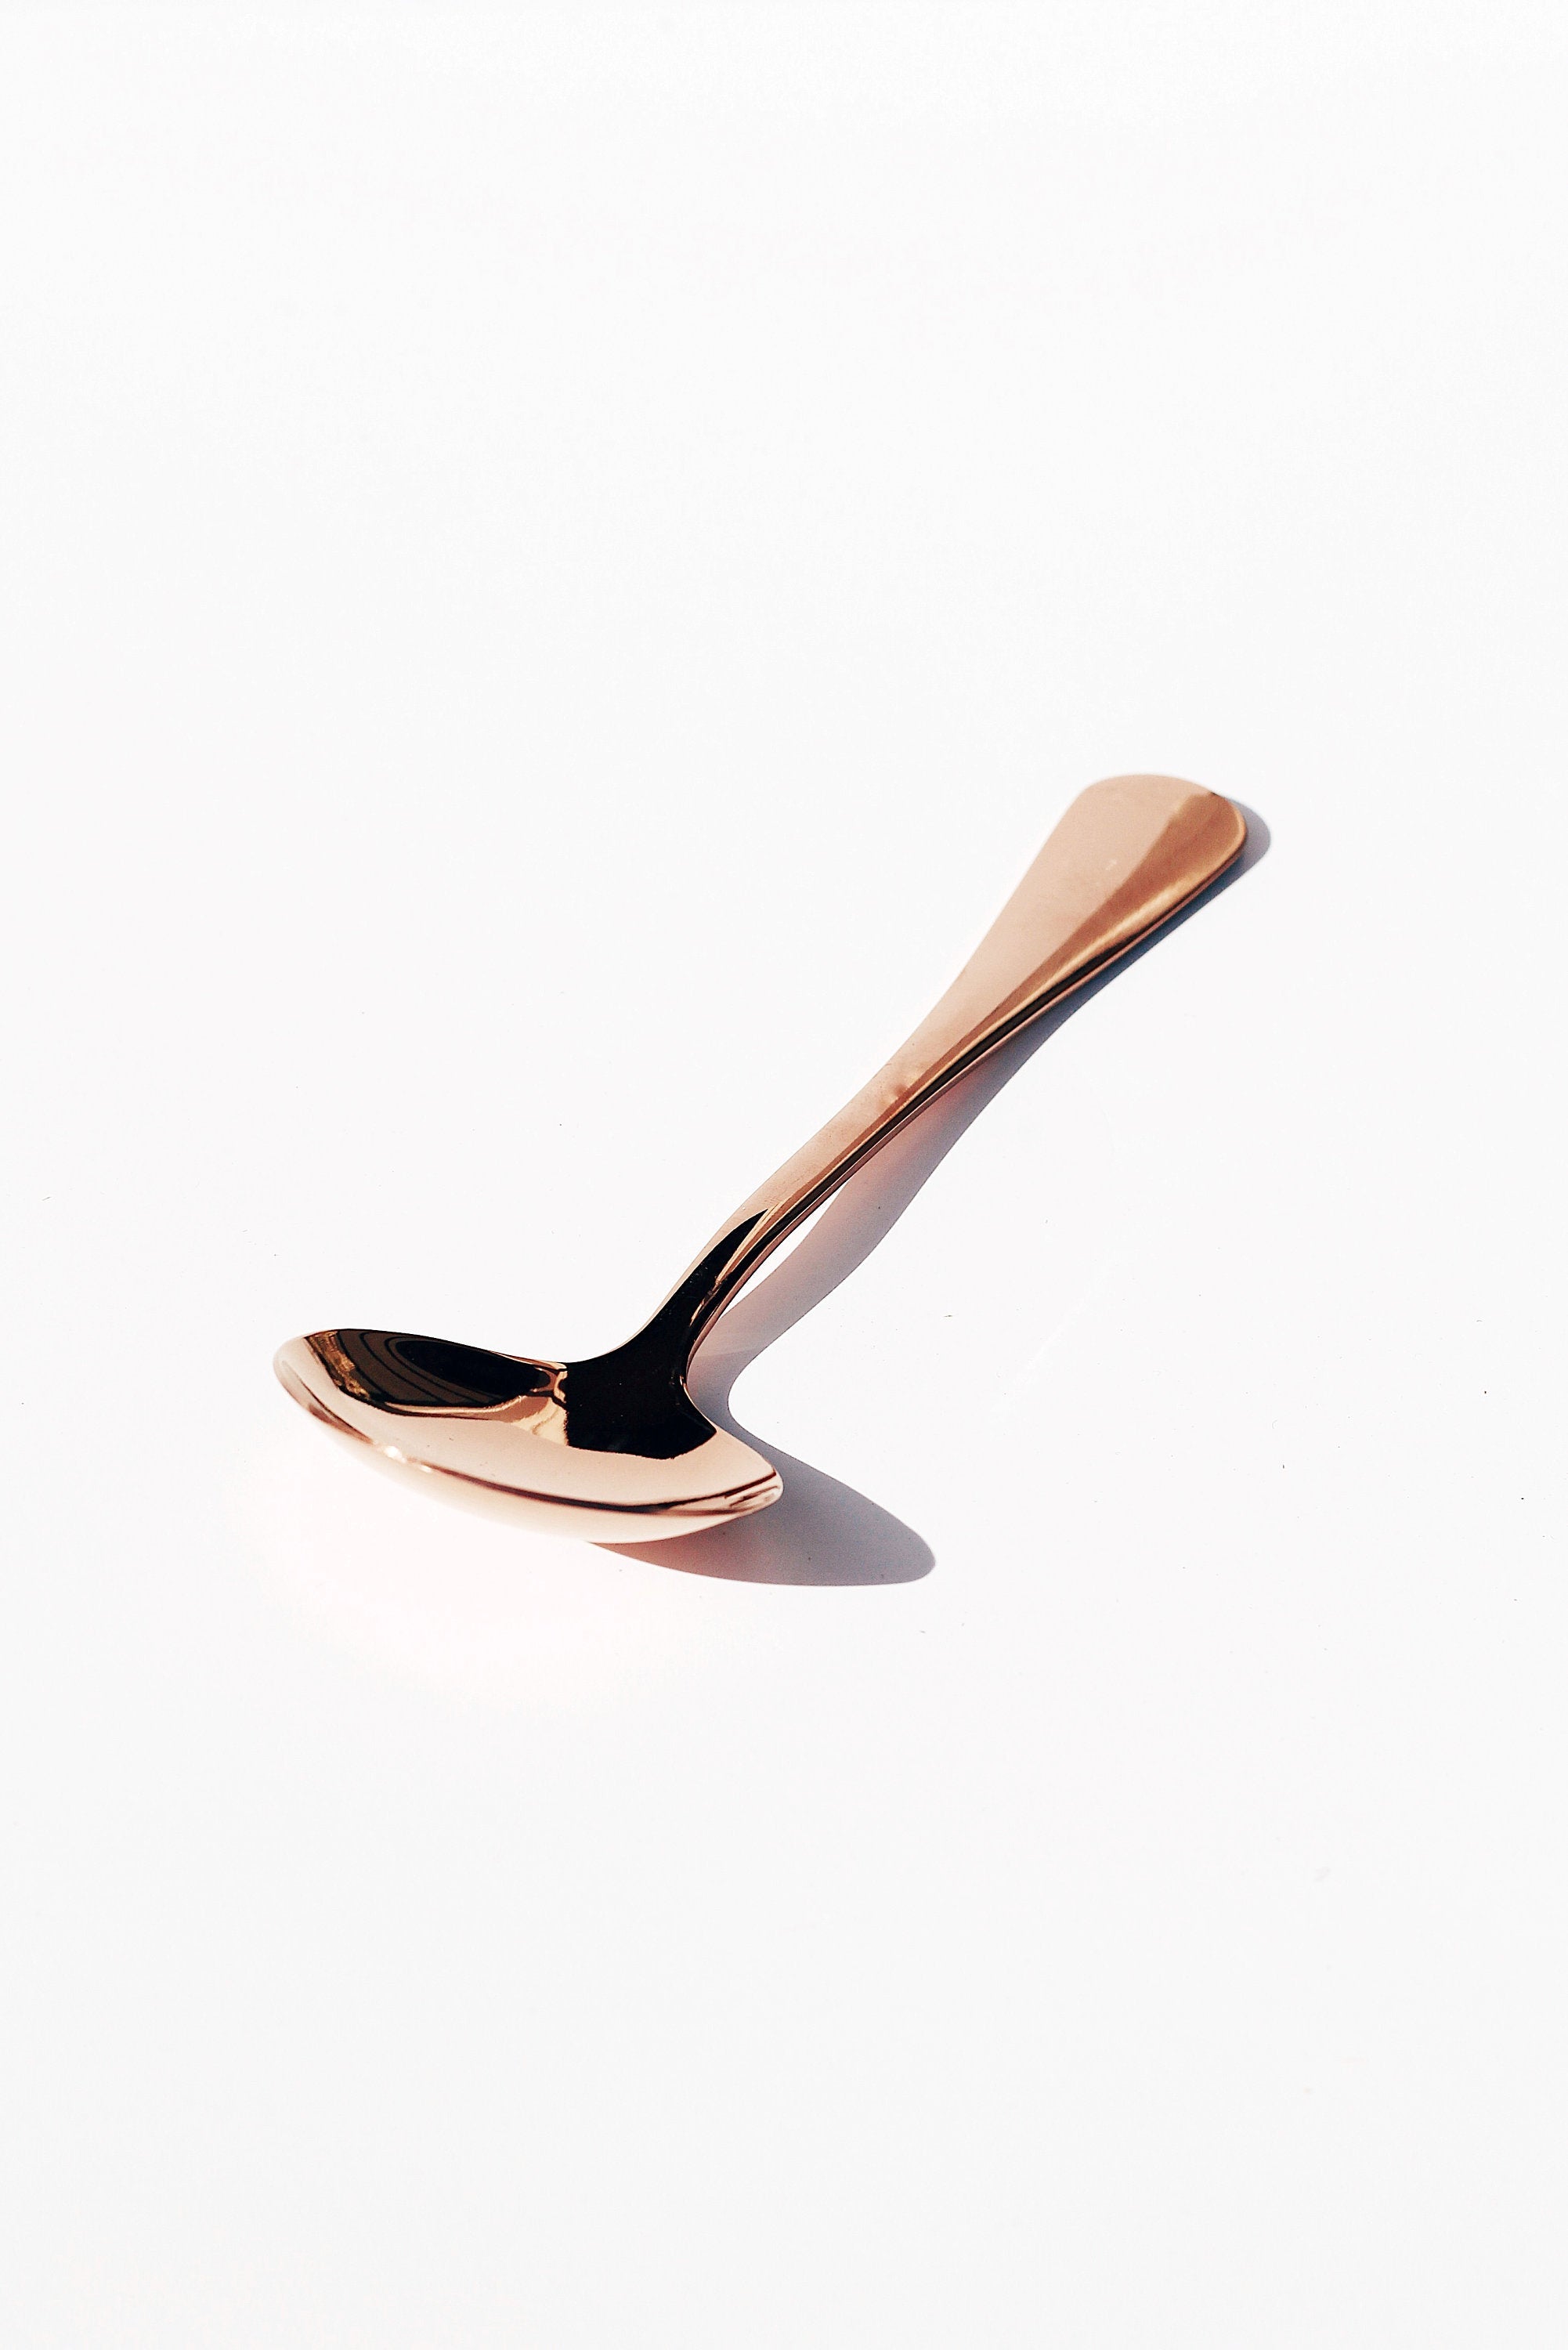 Umeshiso - Cupping Spoon | Rose Gold